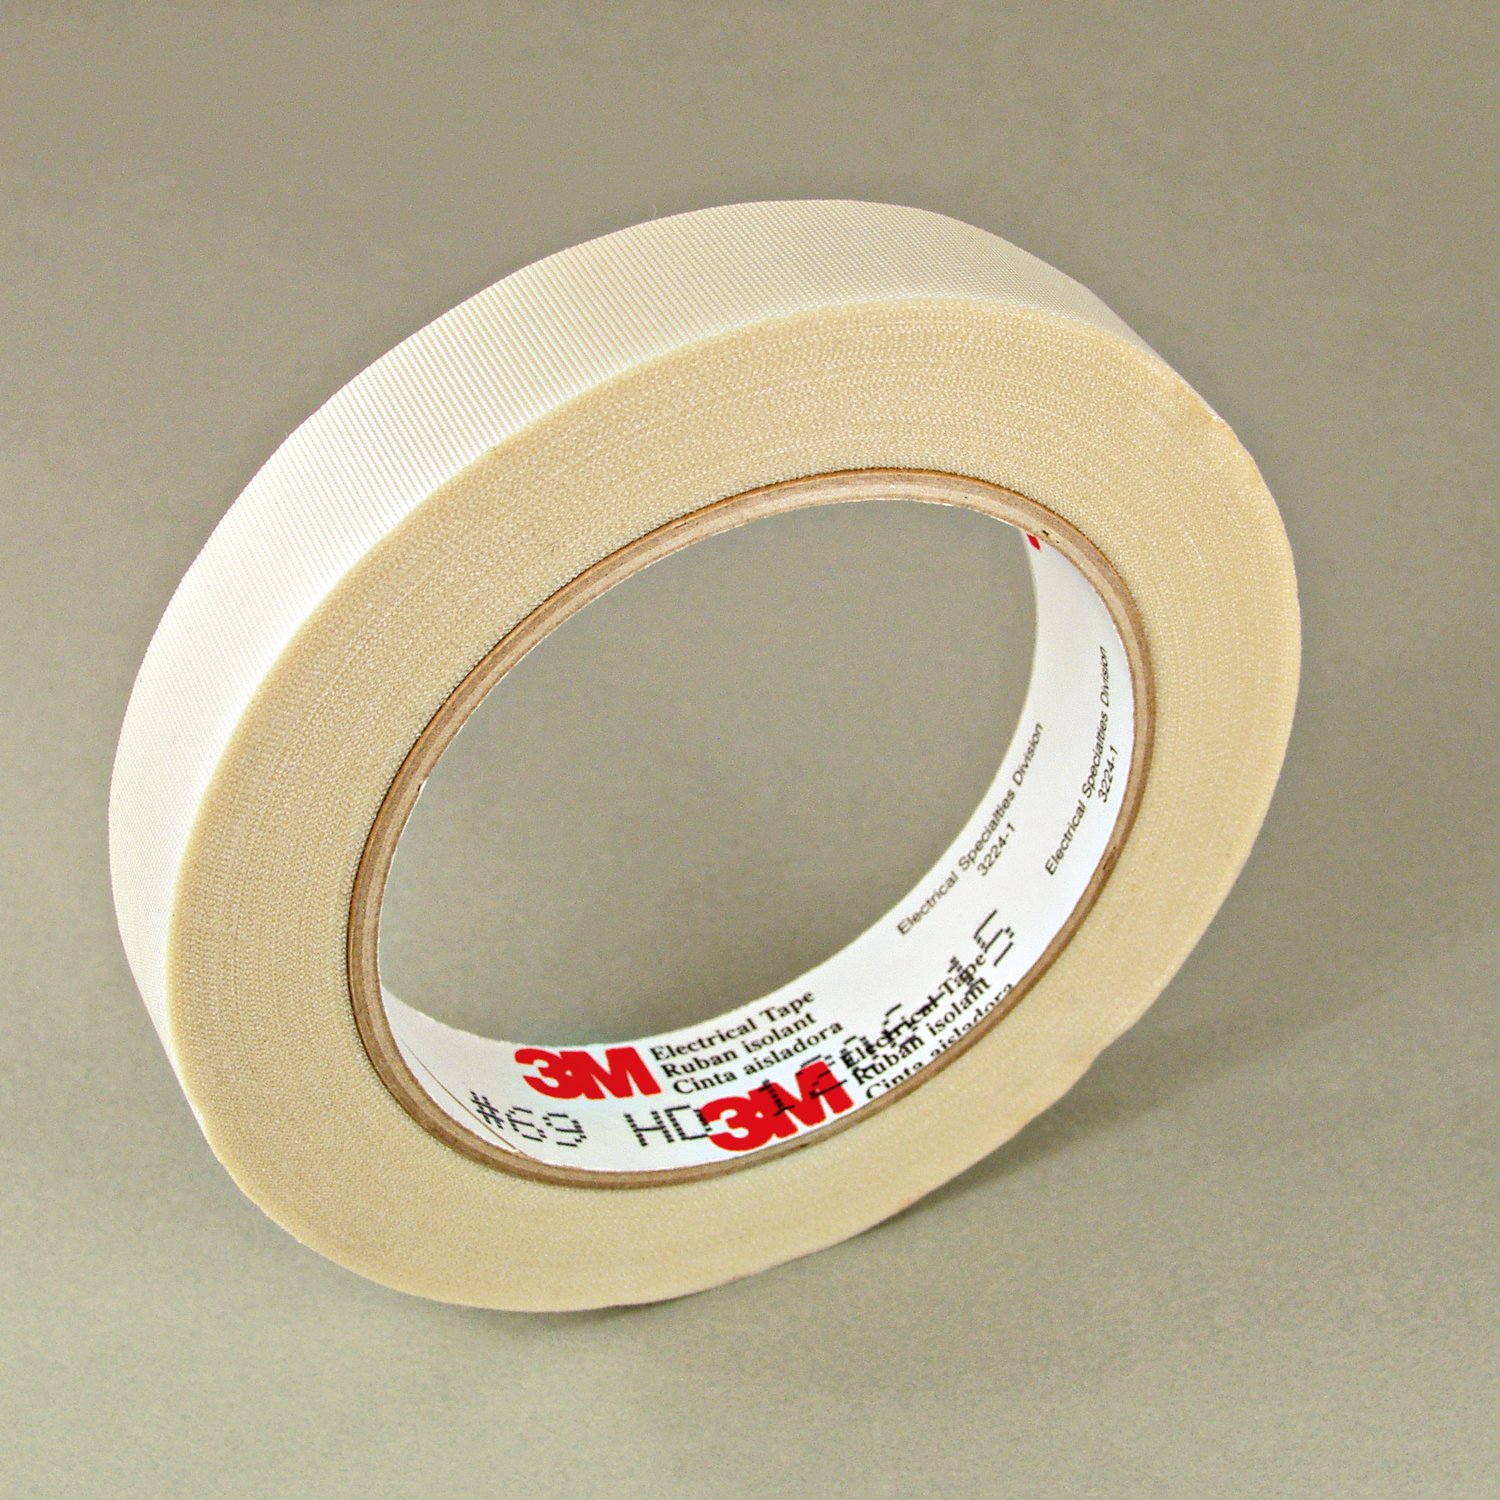 1/8" 3M 69 Glass Cloth Electrical Tape (3M69) with Silicone Adhesive 180°C, white, 1/8" wide x  36 YD roll